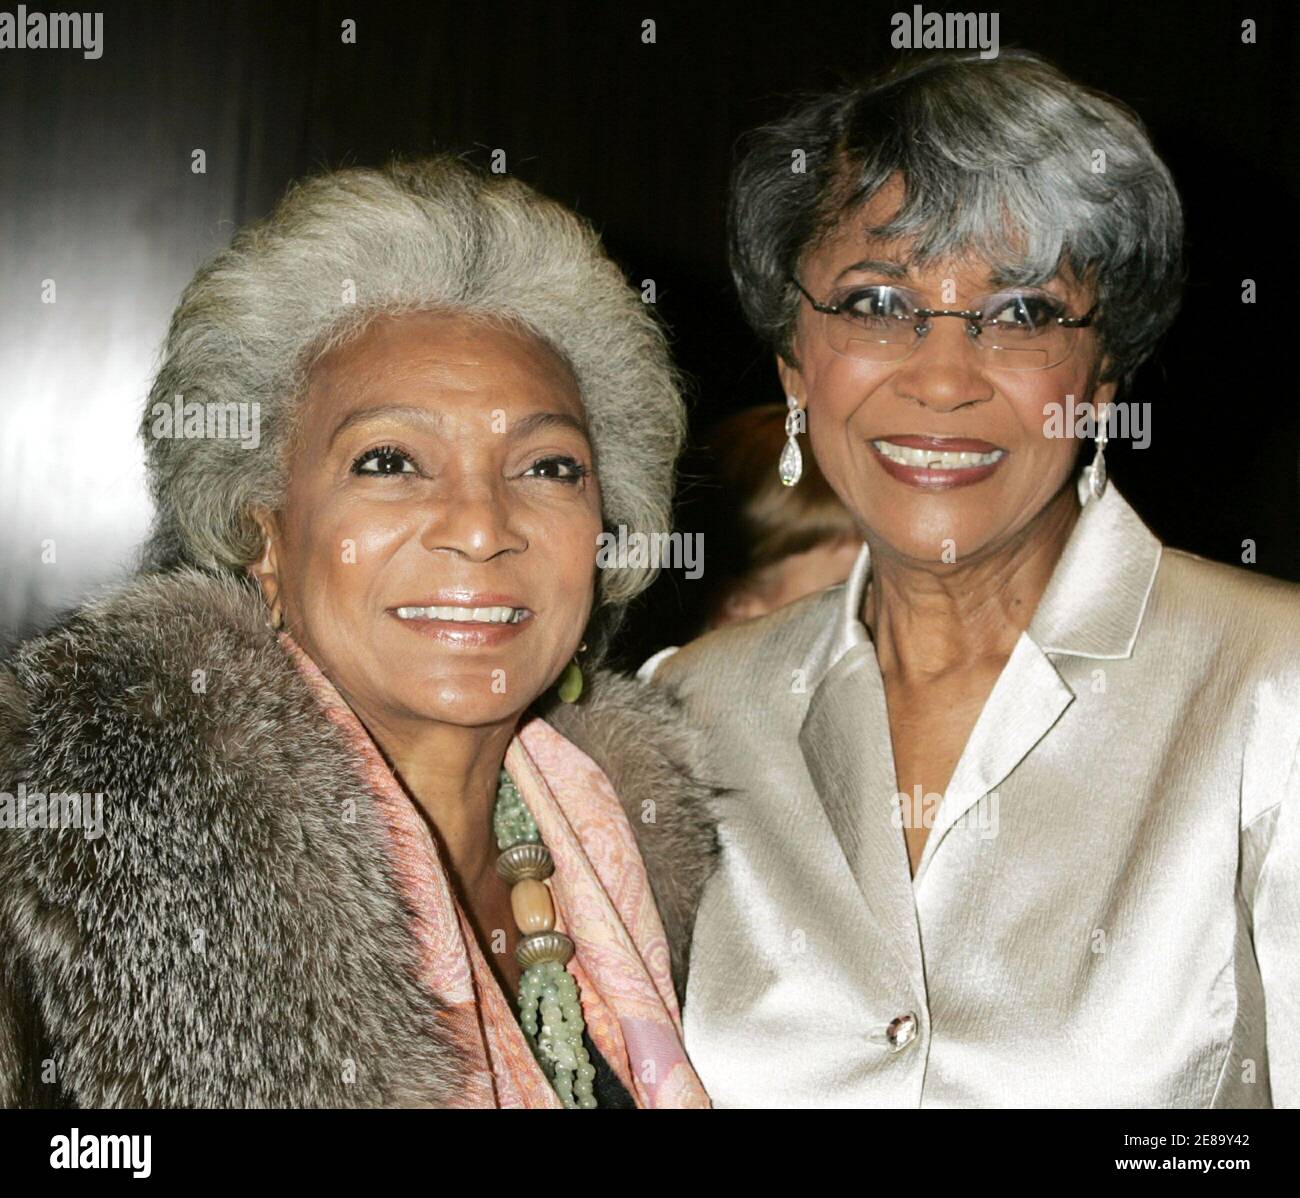 Singer Nancy Wilson (R) and actress Nichelle Nichols, best known for portraying Lieutenant Uhura on Star Trek pose as they arrive at the [David Gest] gala titled 'THE Party' in Beverly Hills October 17, 2005. [Gest, a producer, held the gala to celebrate the launch of his new Hollywood based firm 'Extreme Entertaintment Enterprises' which is set to produce a television special in 2006 titled 'Dionne Warwick 45th Anniversary Spectacular.'] Stock Photo